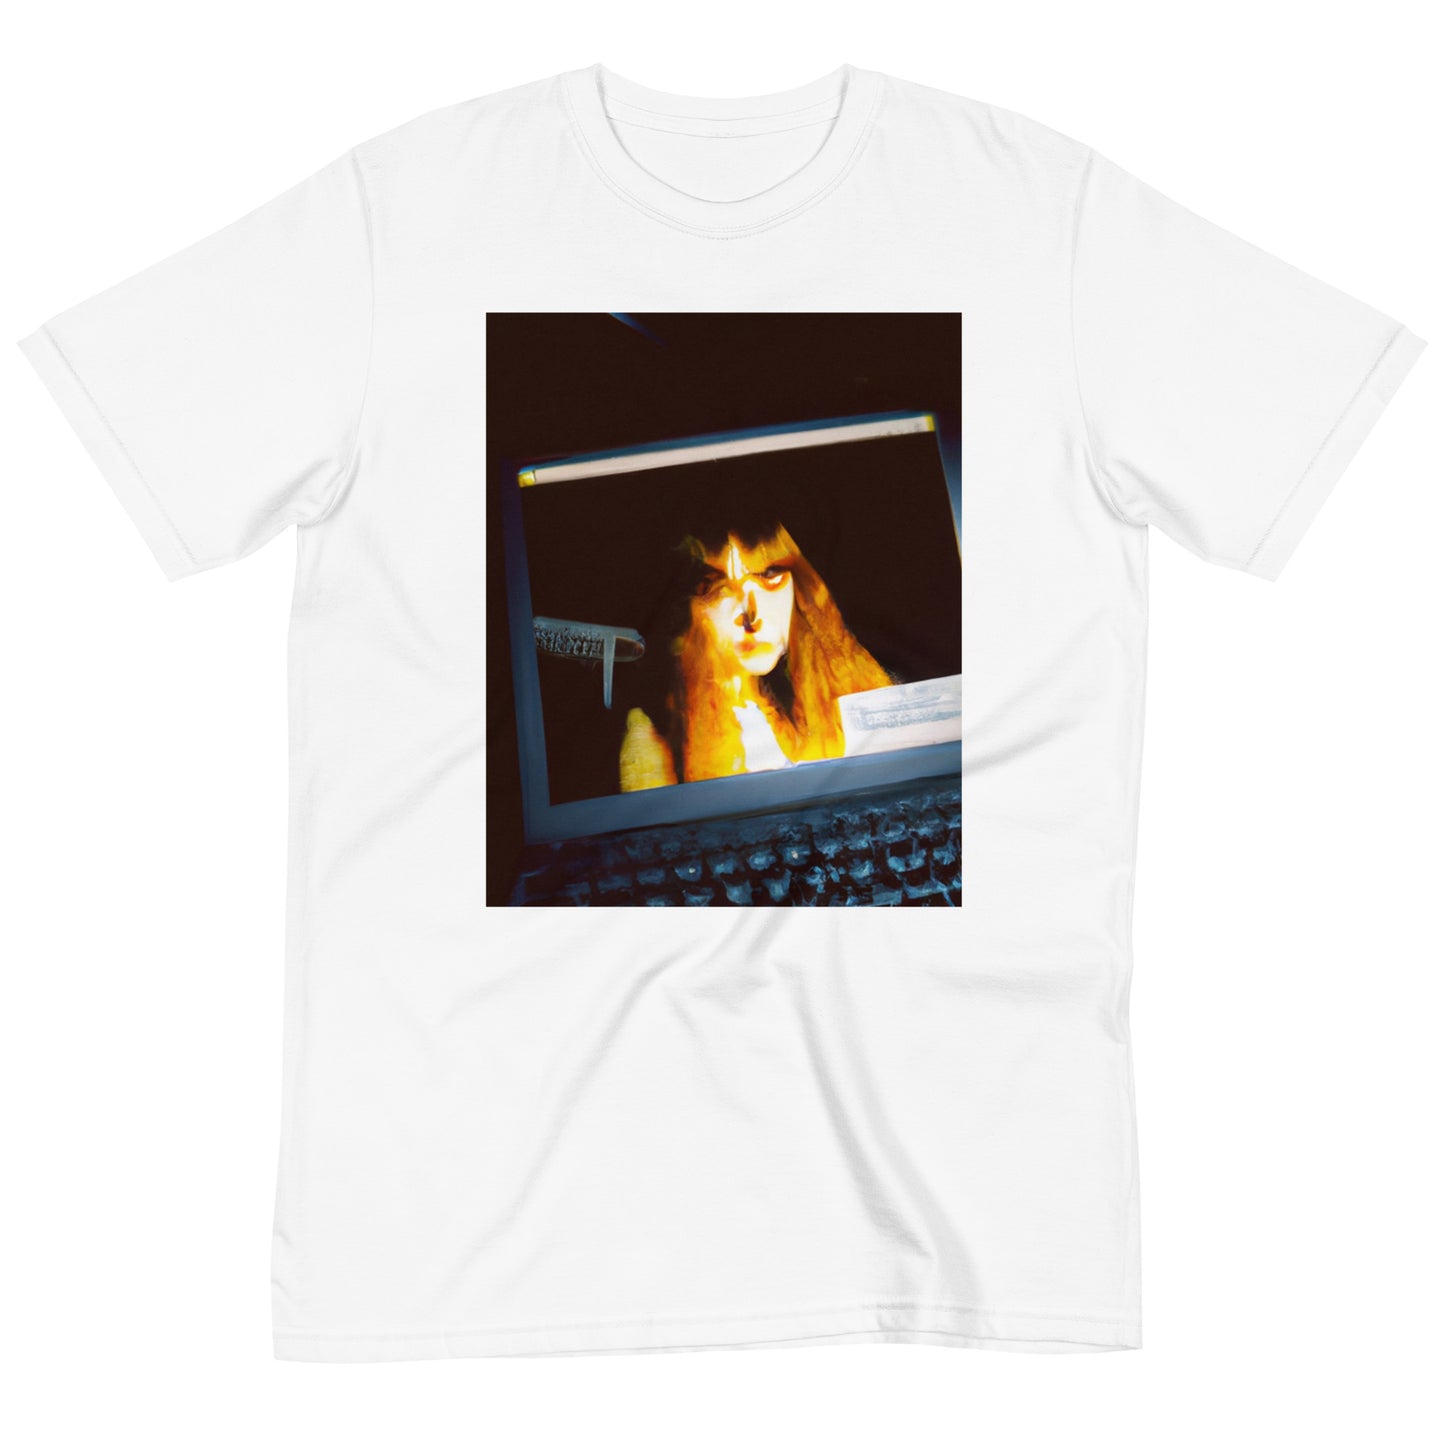 she's in the computer Tee